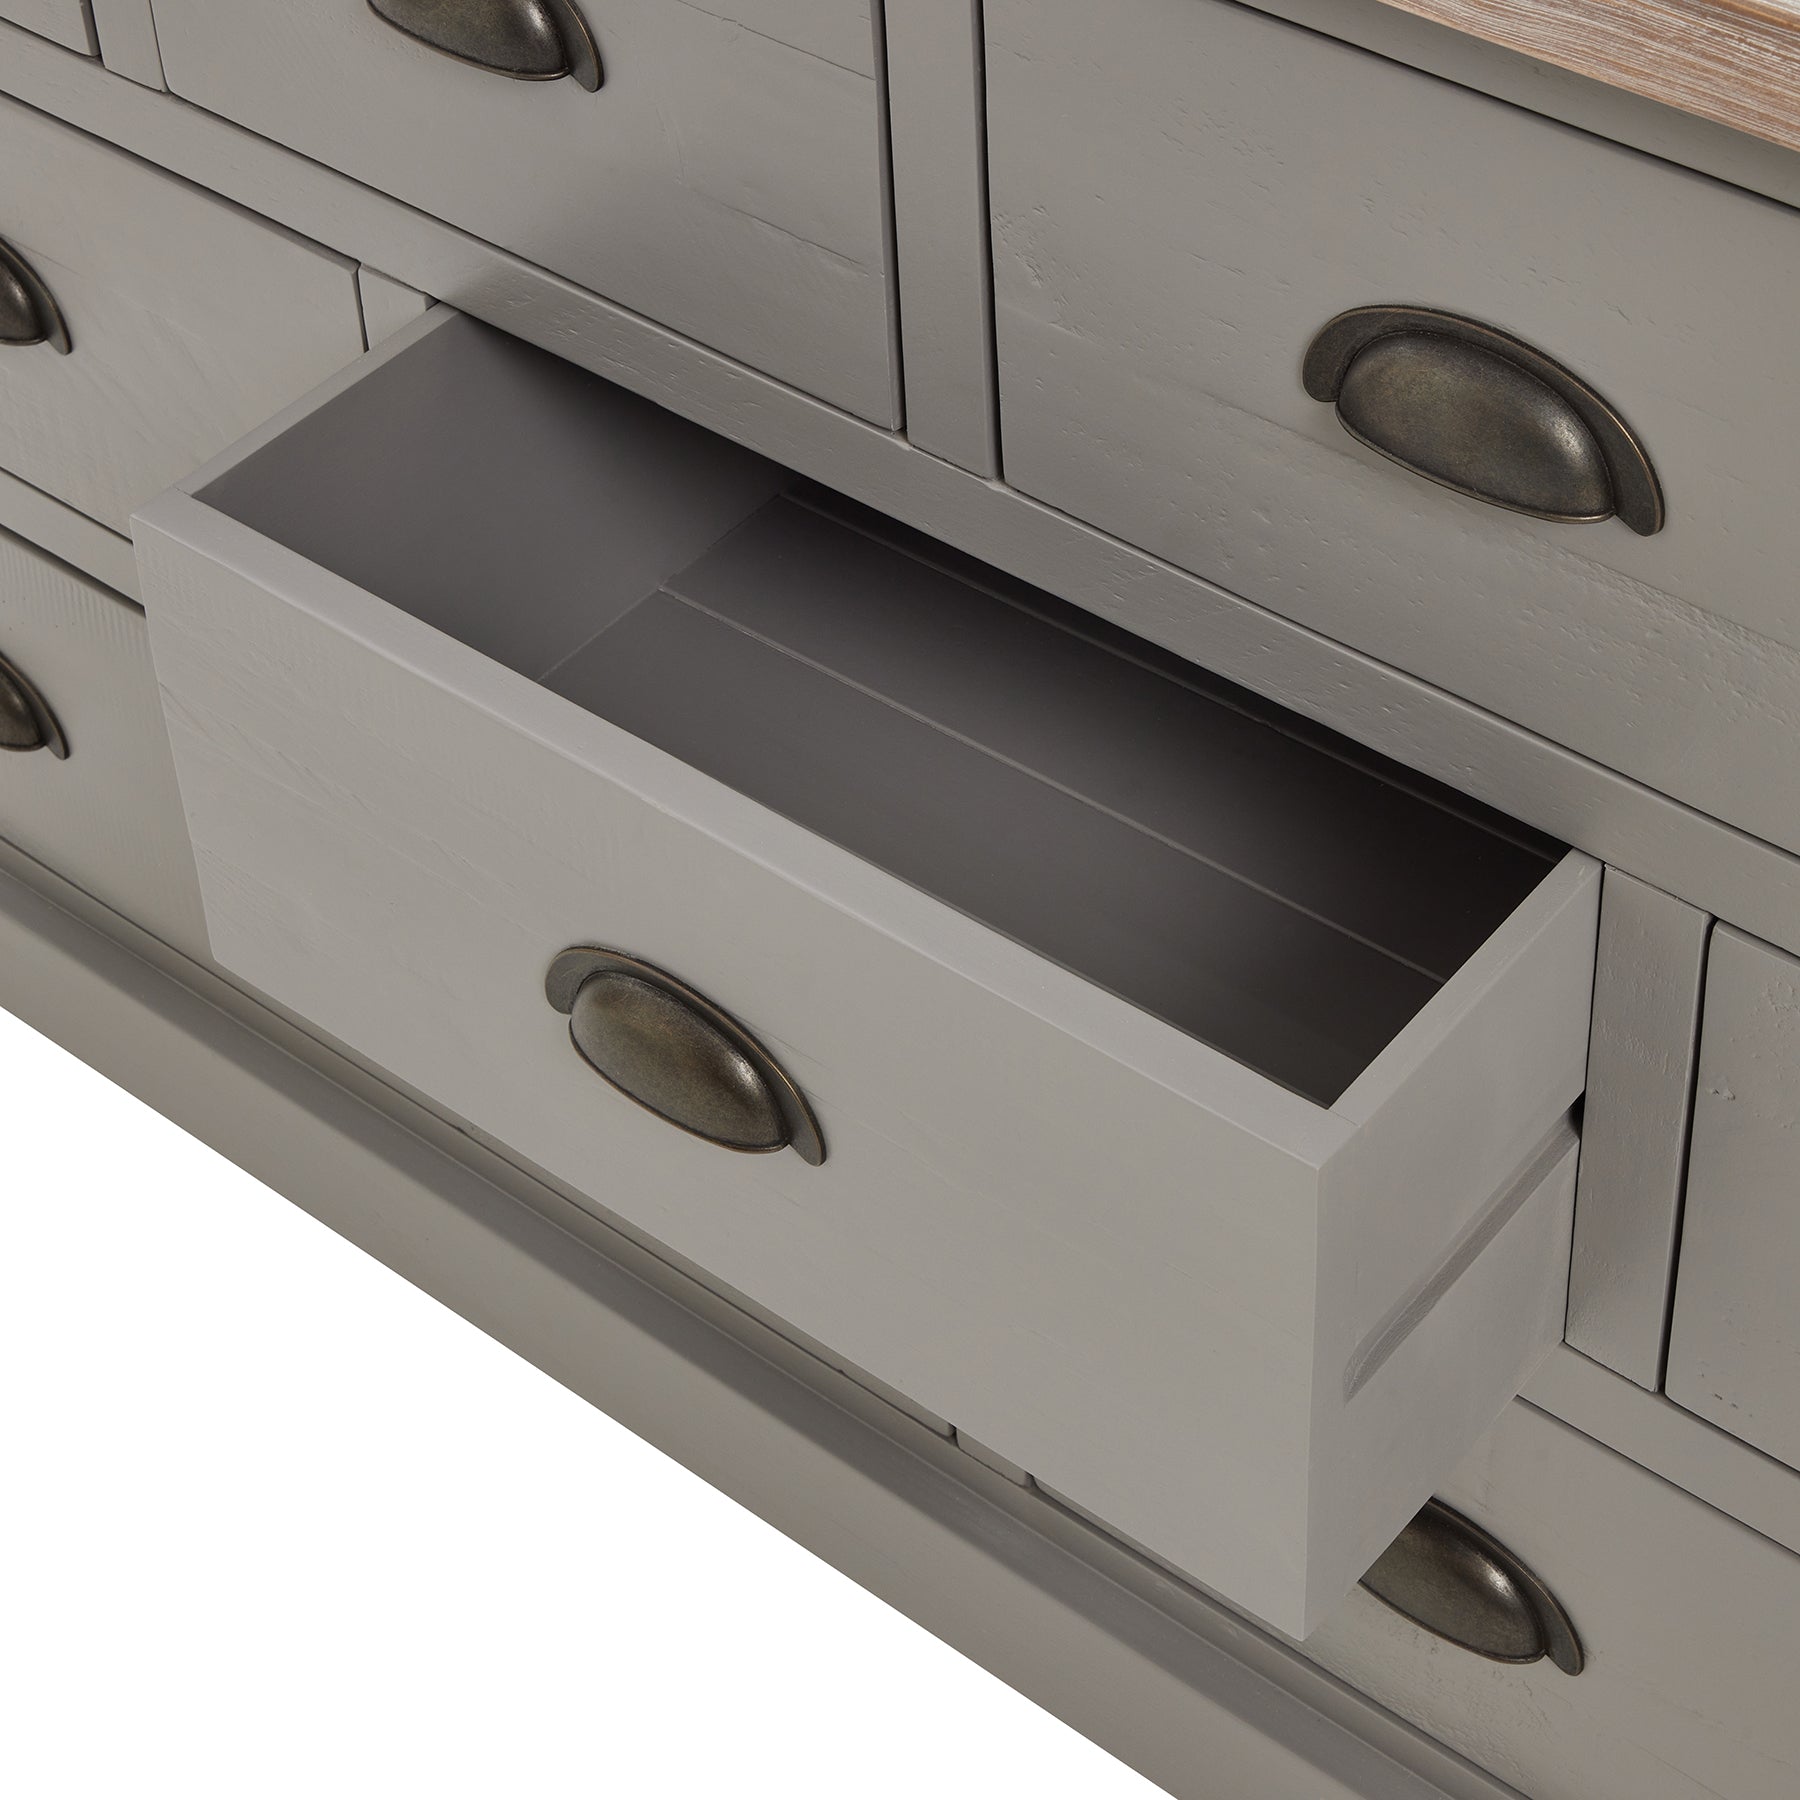 The Oxley Collection Nine Drawer Chest